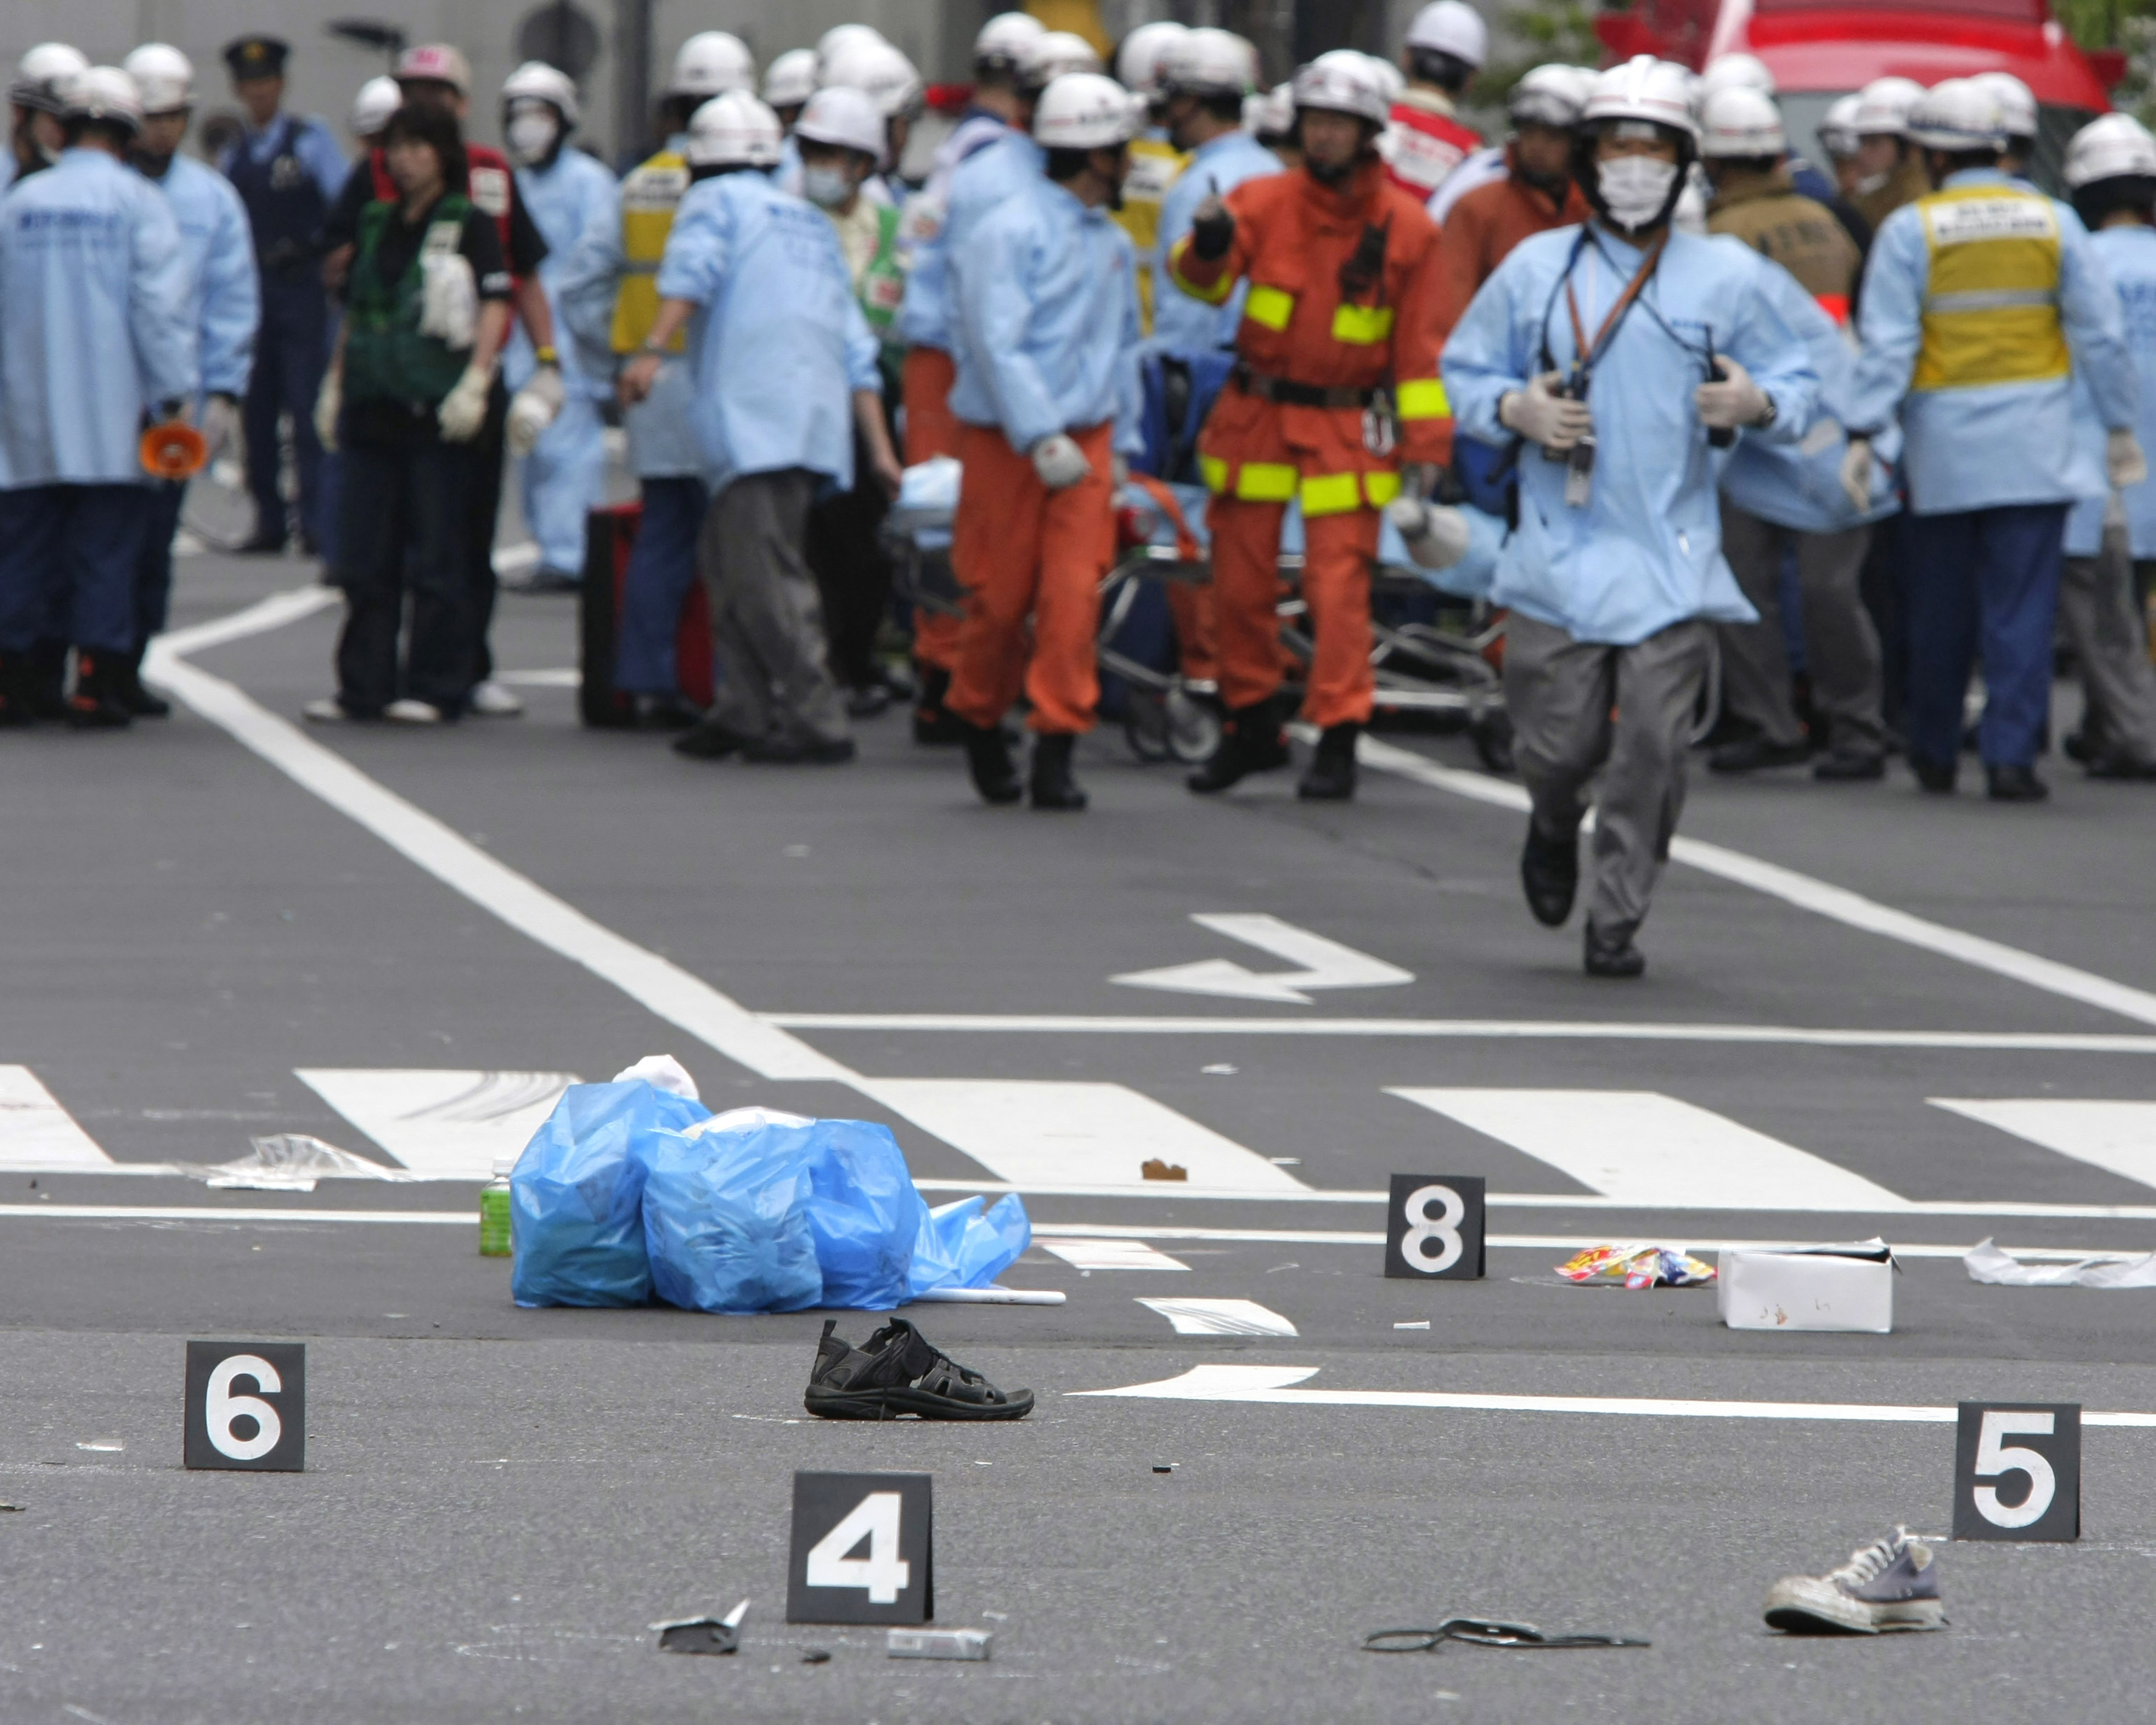 The shoes of the victims in a street after the attack in the Akihabara district of Tokyo in 2008 (AP Photo/Itsuo Inouye, archive)